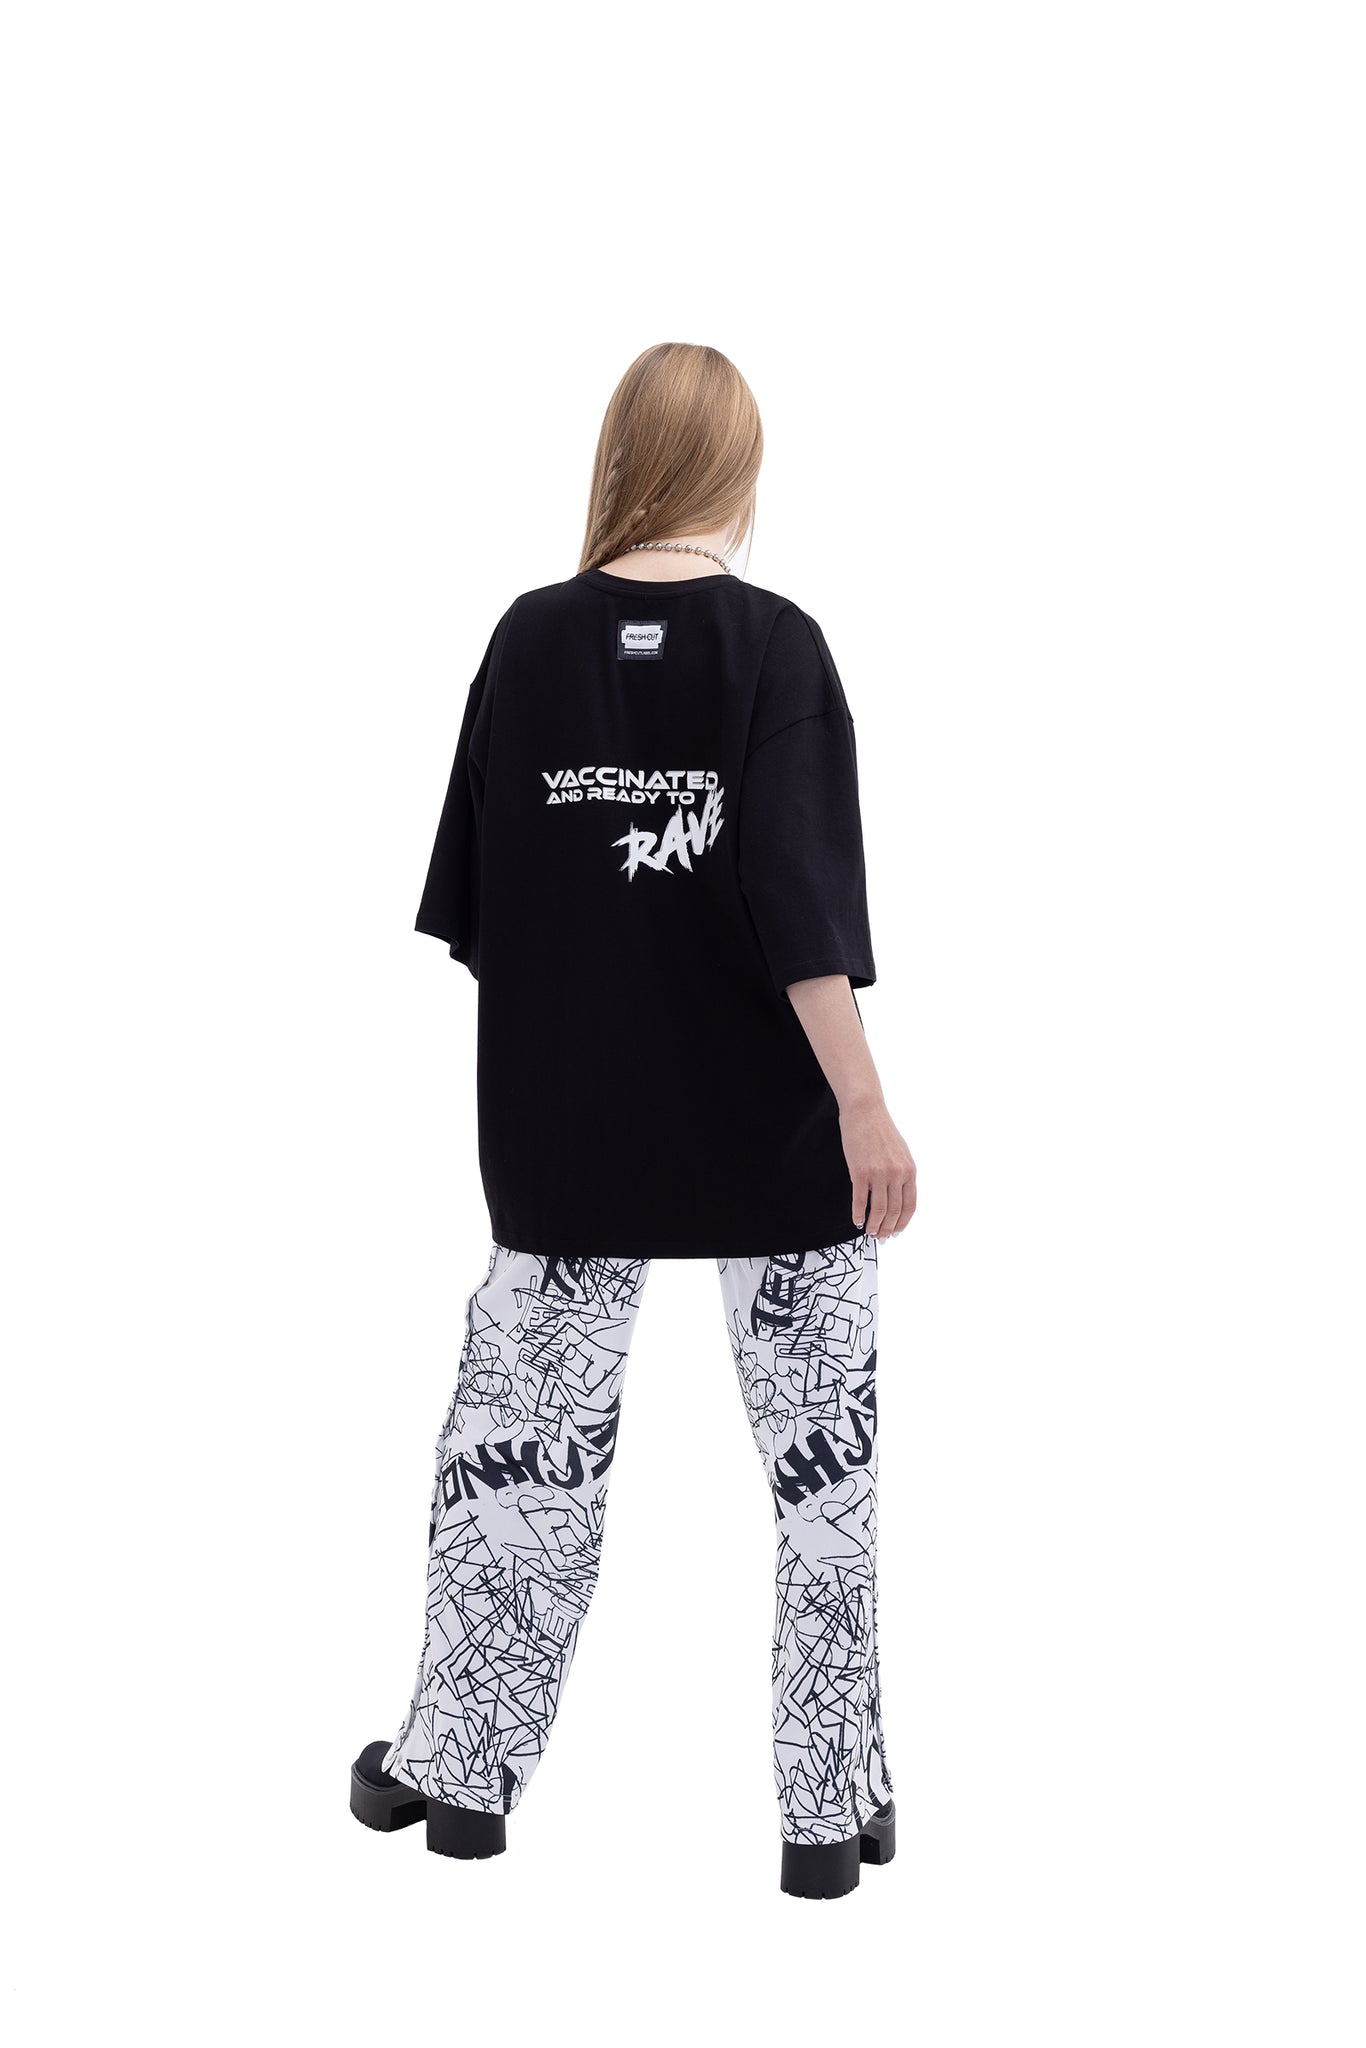 Vaccinated Unisex Oversized T-shirt with reflective details